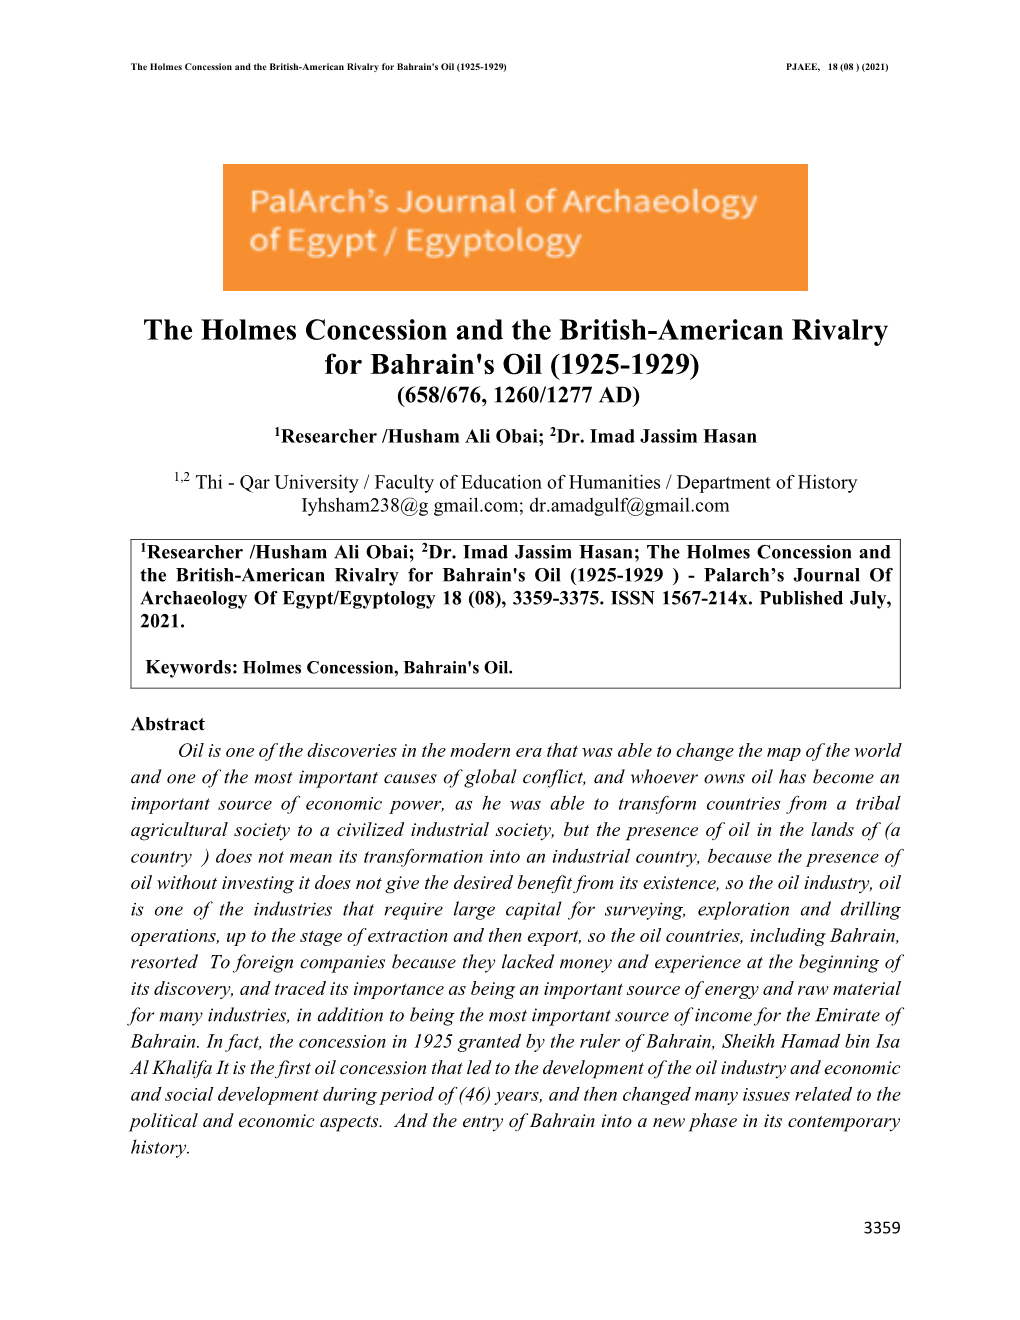 The Holmes Concession and the British-American Rivalry for Bahrain's Oil (1925-1929( PJAEE, 18 (08 ) (2021)